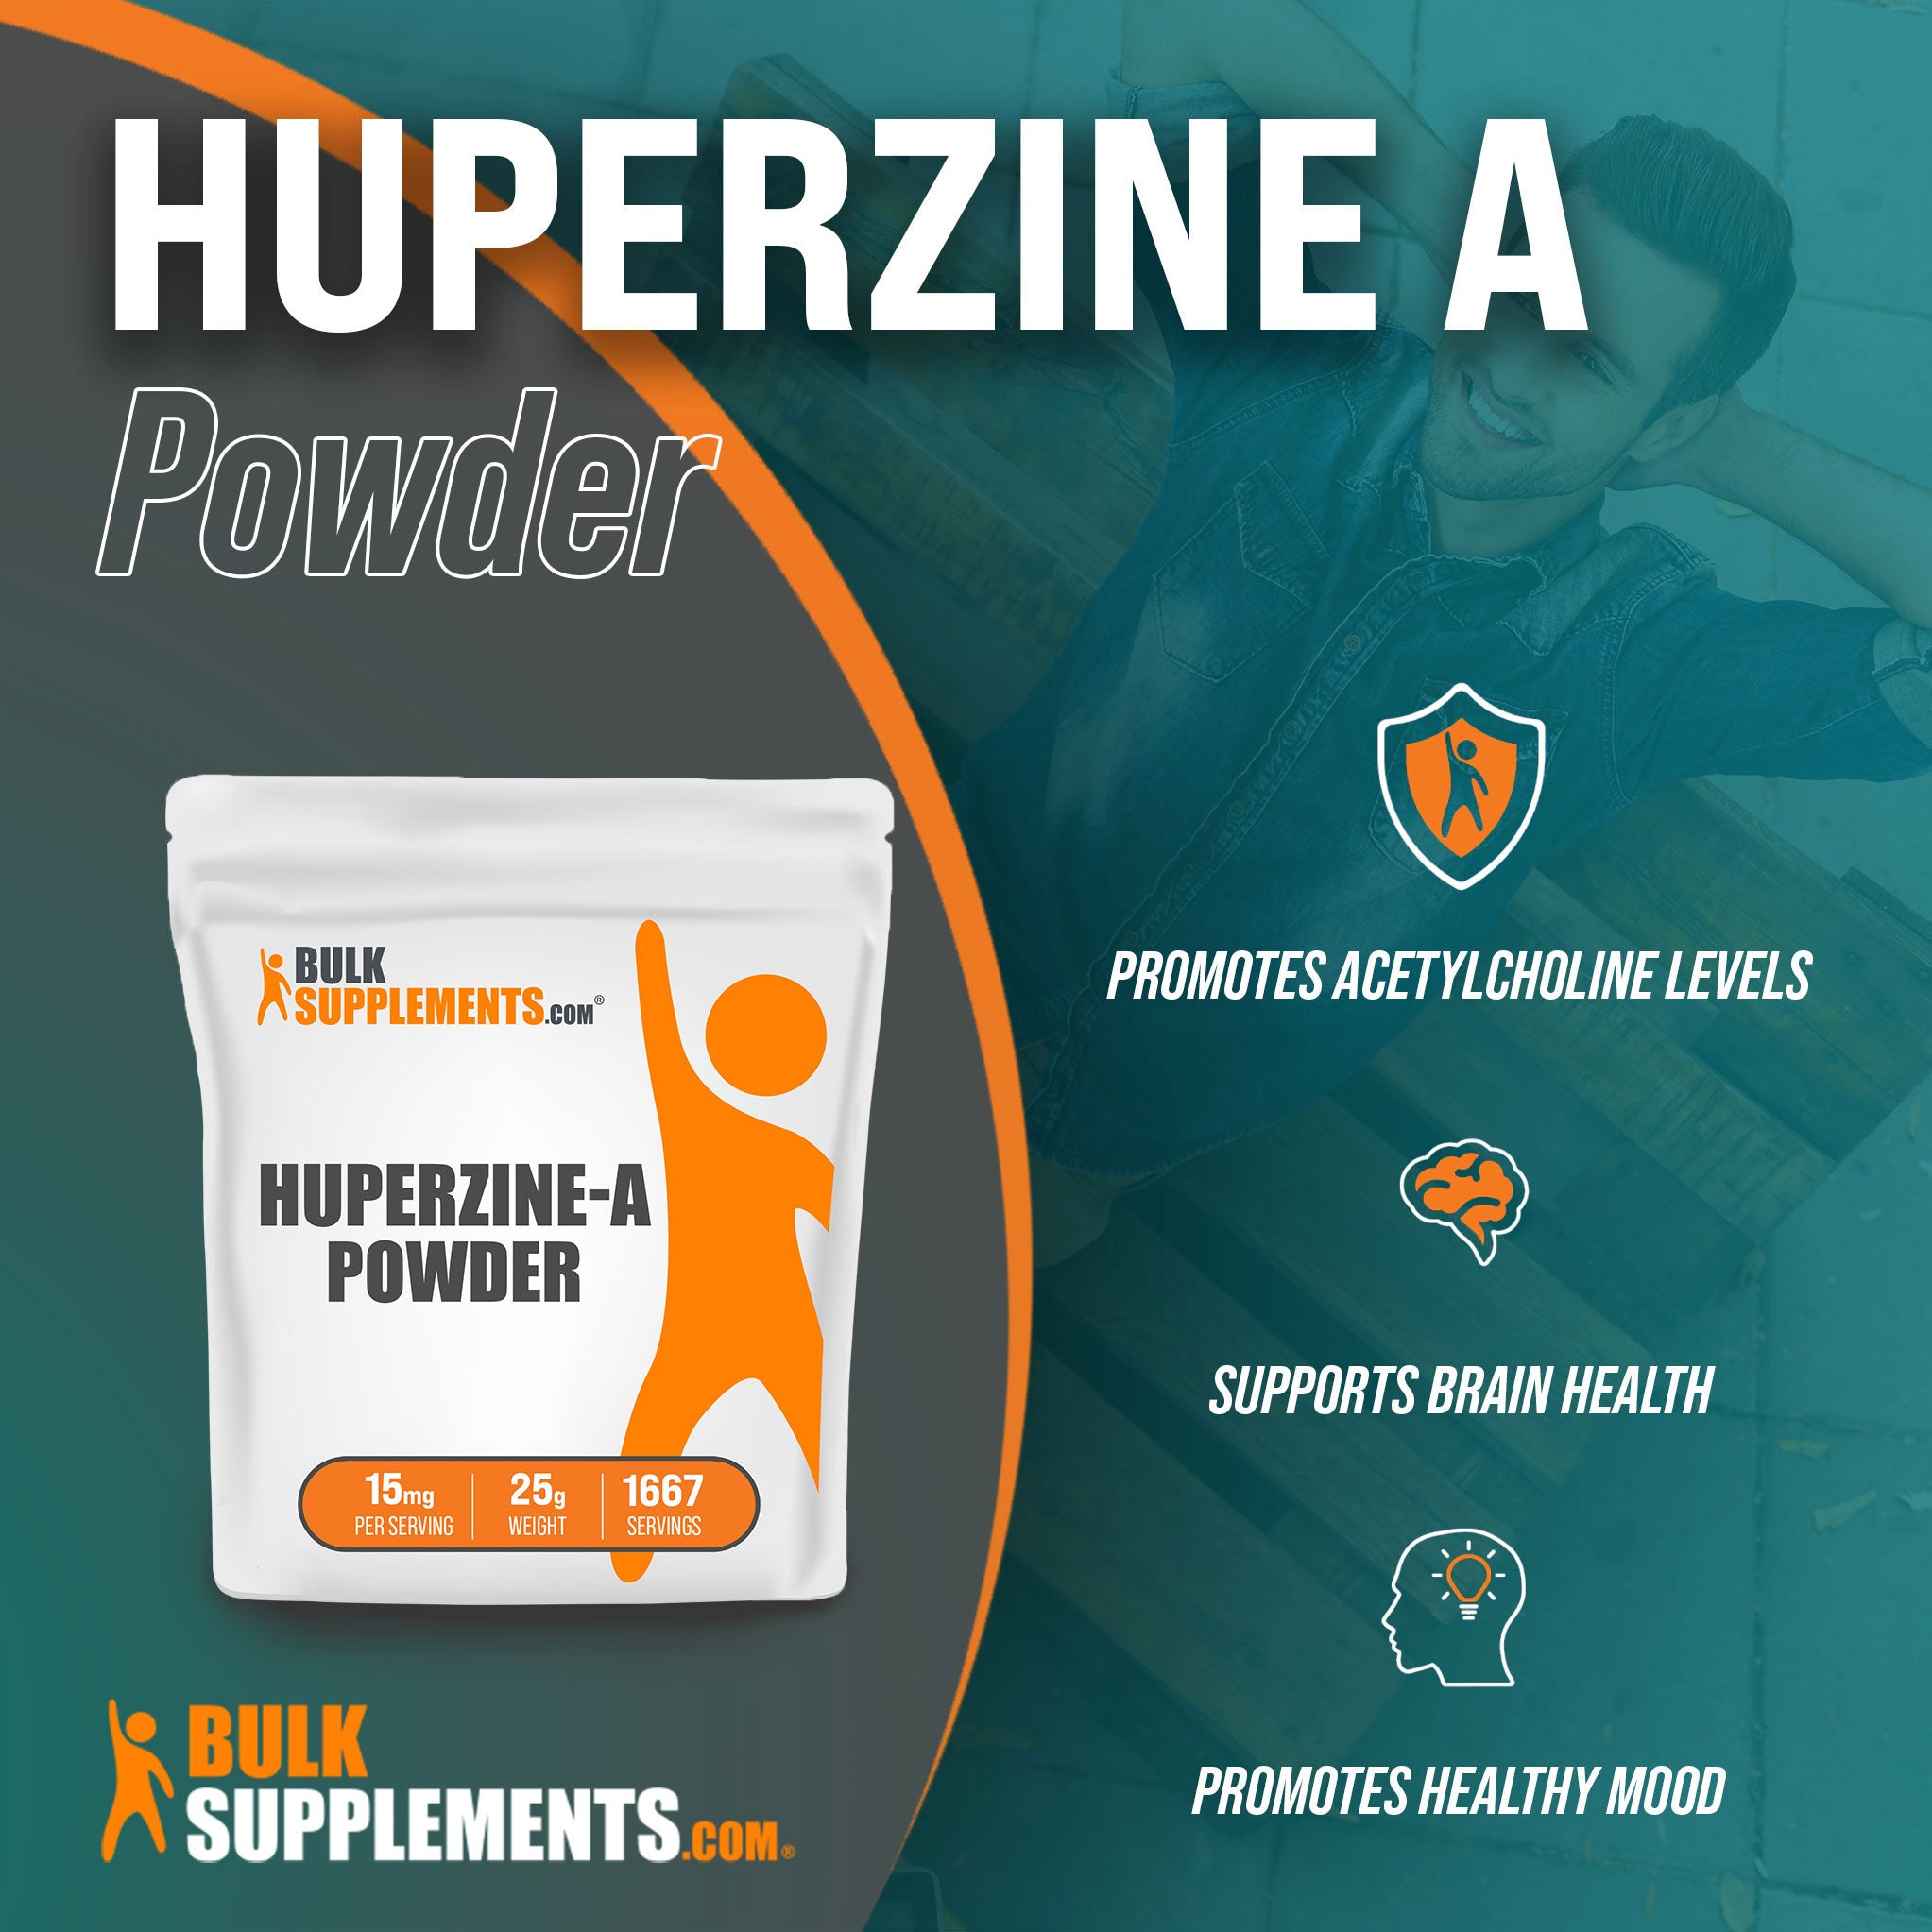 Benefits of Huperzine A; promotes acetylcholine levels, supports brain health, promotes healthy mood